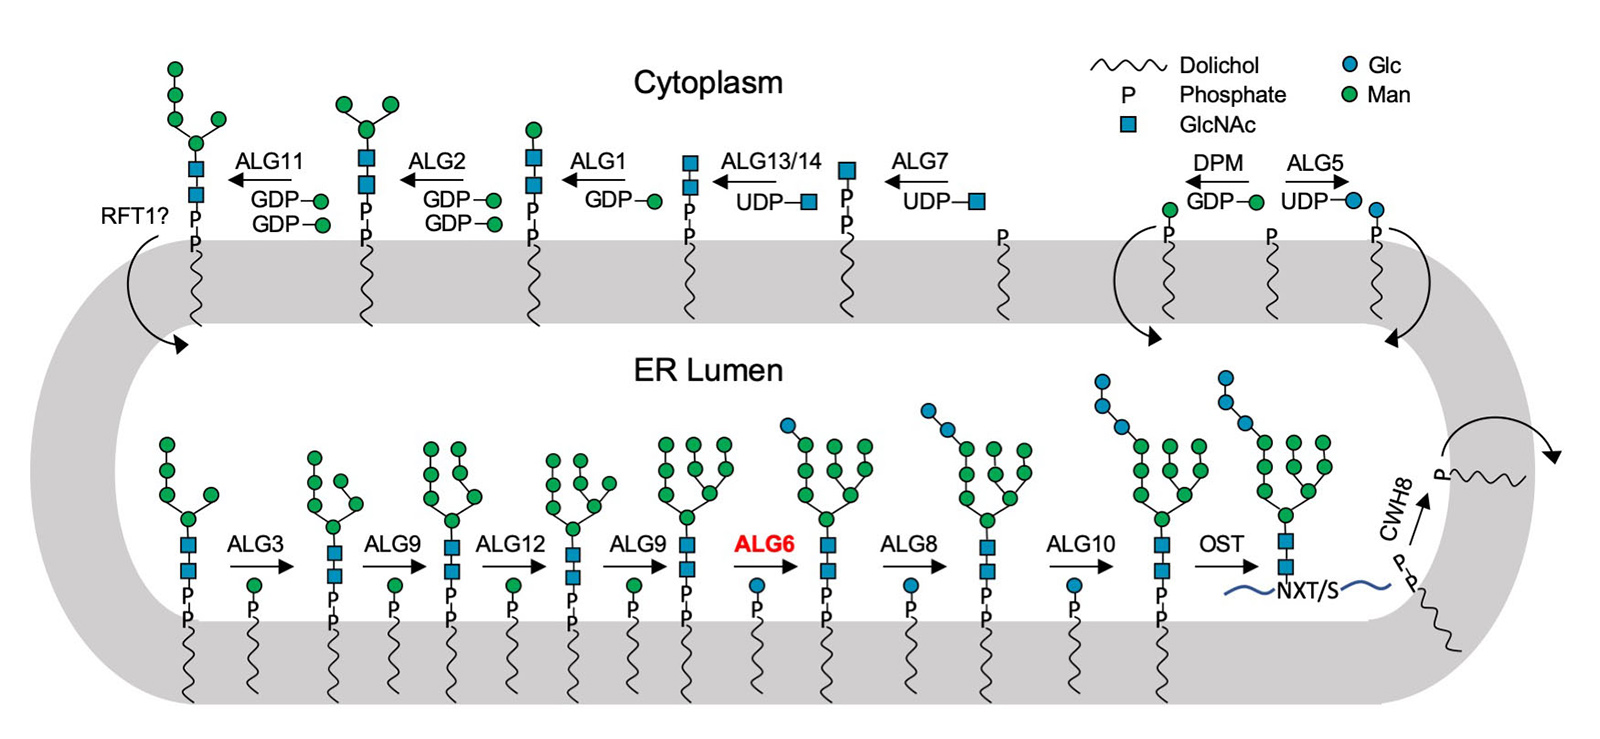 Schematic of the biosynthetic pathway for lipid-linked oligosaccharides. Enzyme names are indicated above the arrows, the required substrates below. ALG6 is highlighted in red. (Illustration: Joël S. Bloch / ETH Zurich)